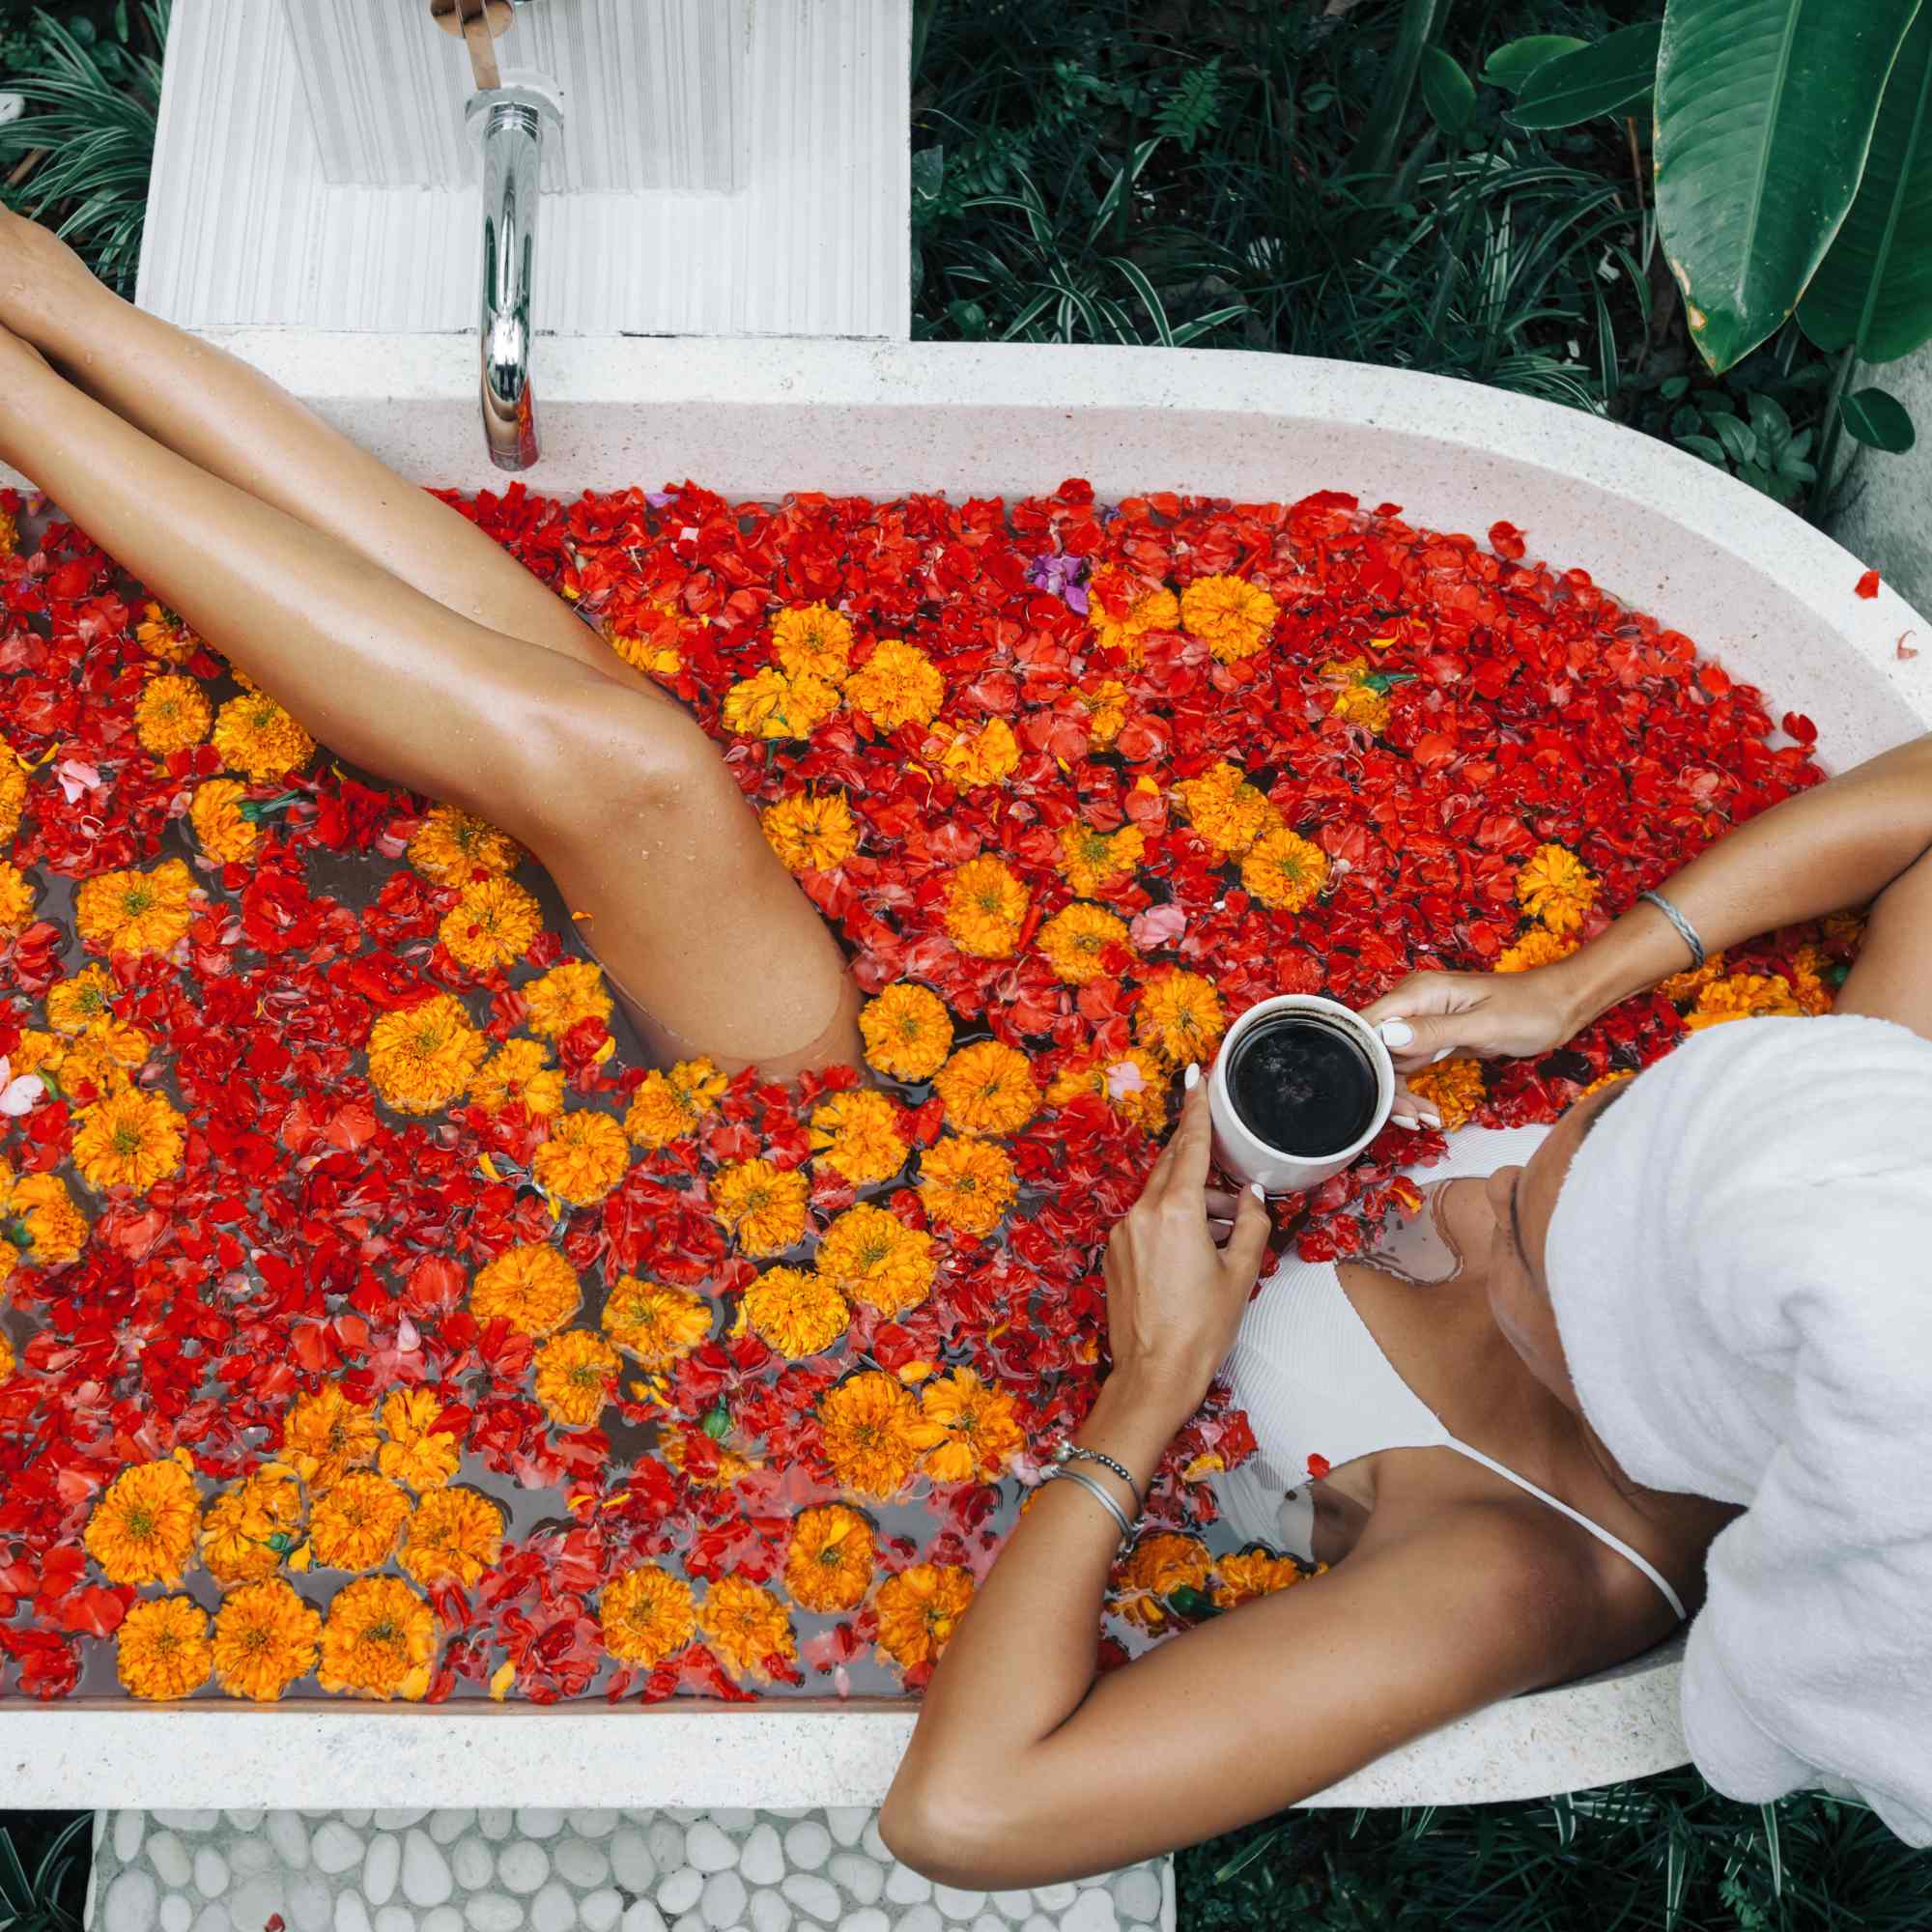 Red and orange petals fill a bath with a women relaxing and enjoying the best flower bath in Bali